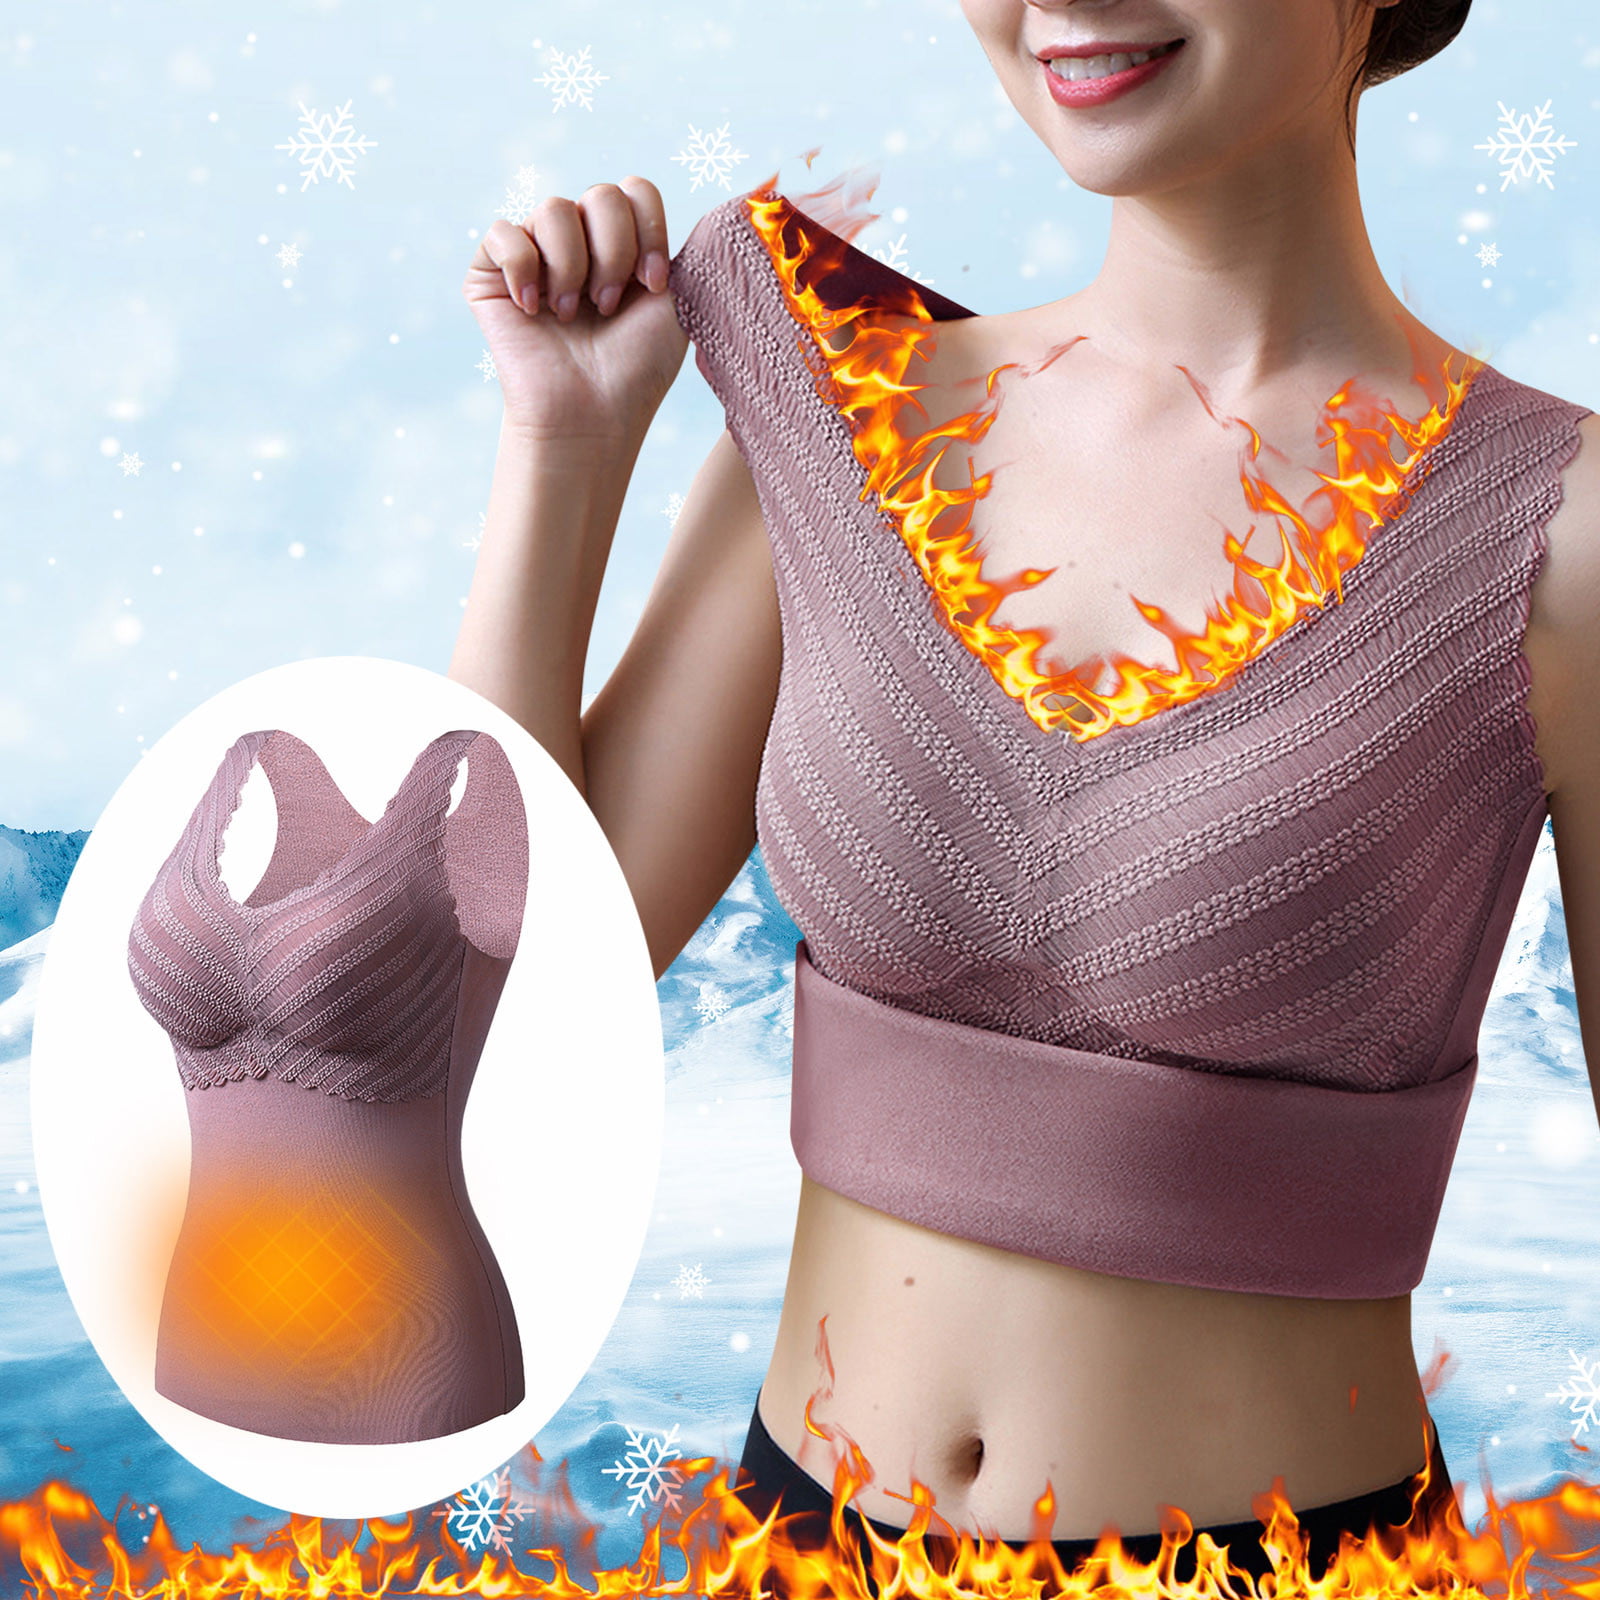 Slim Fit Tops For Womens Sleeveless Thermal Shirts V Neck Vest With Built  In Bra Lined Underwear Thermal Tank Top With Spongy Pad Winter Tops Thermal  Underwear Top Purple XXXL 